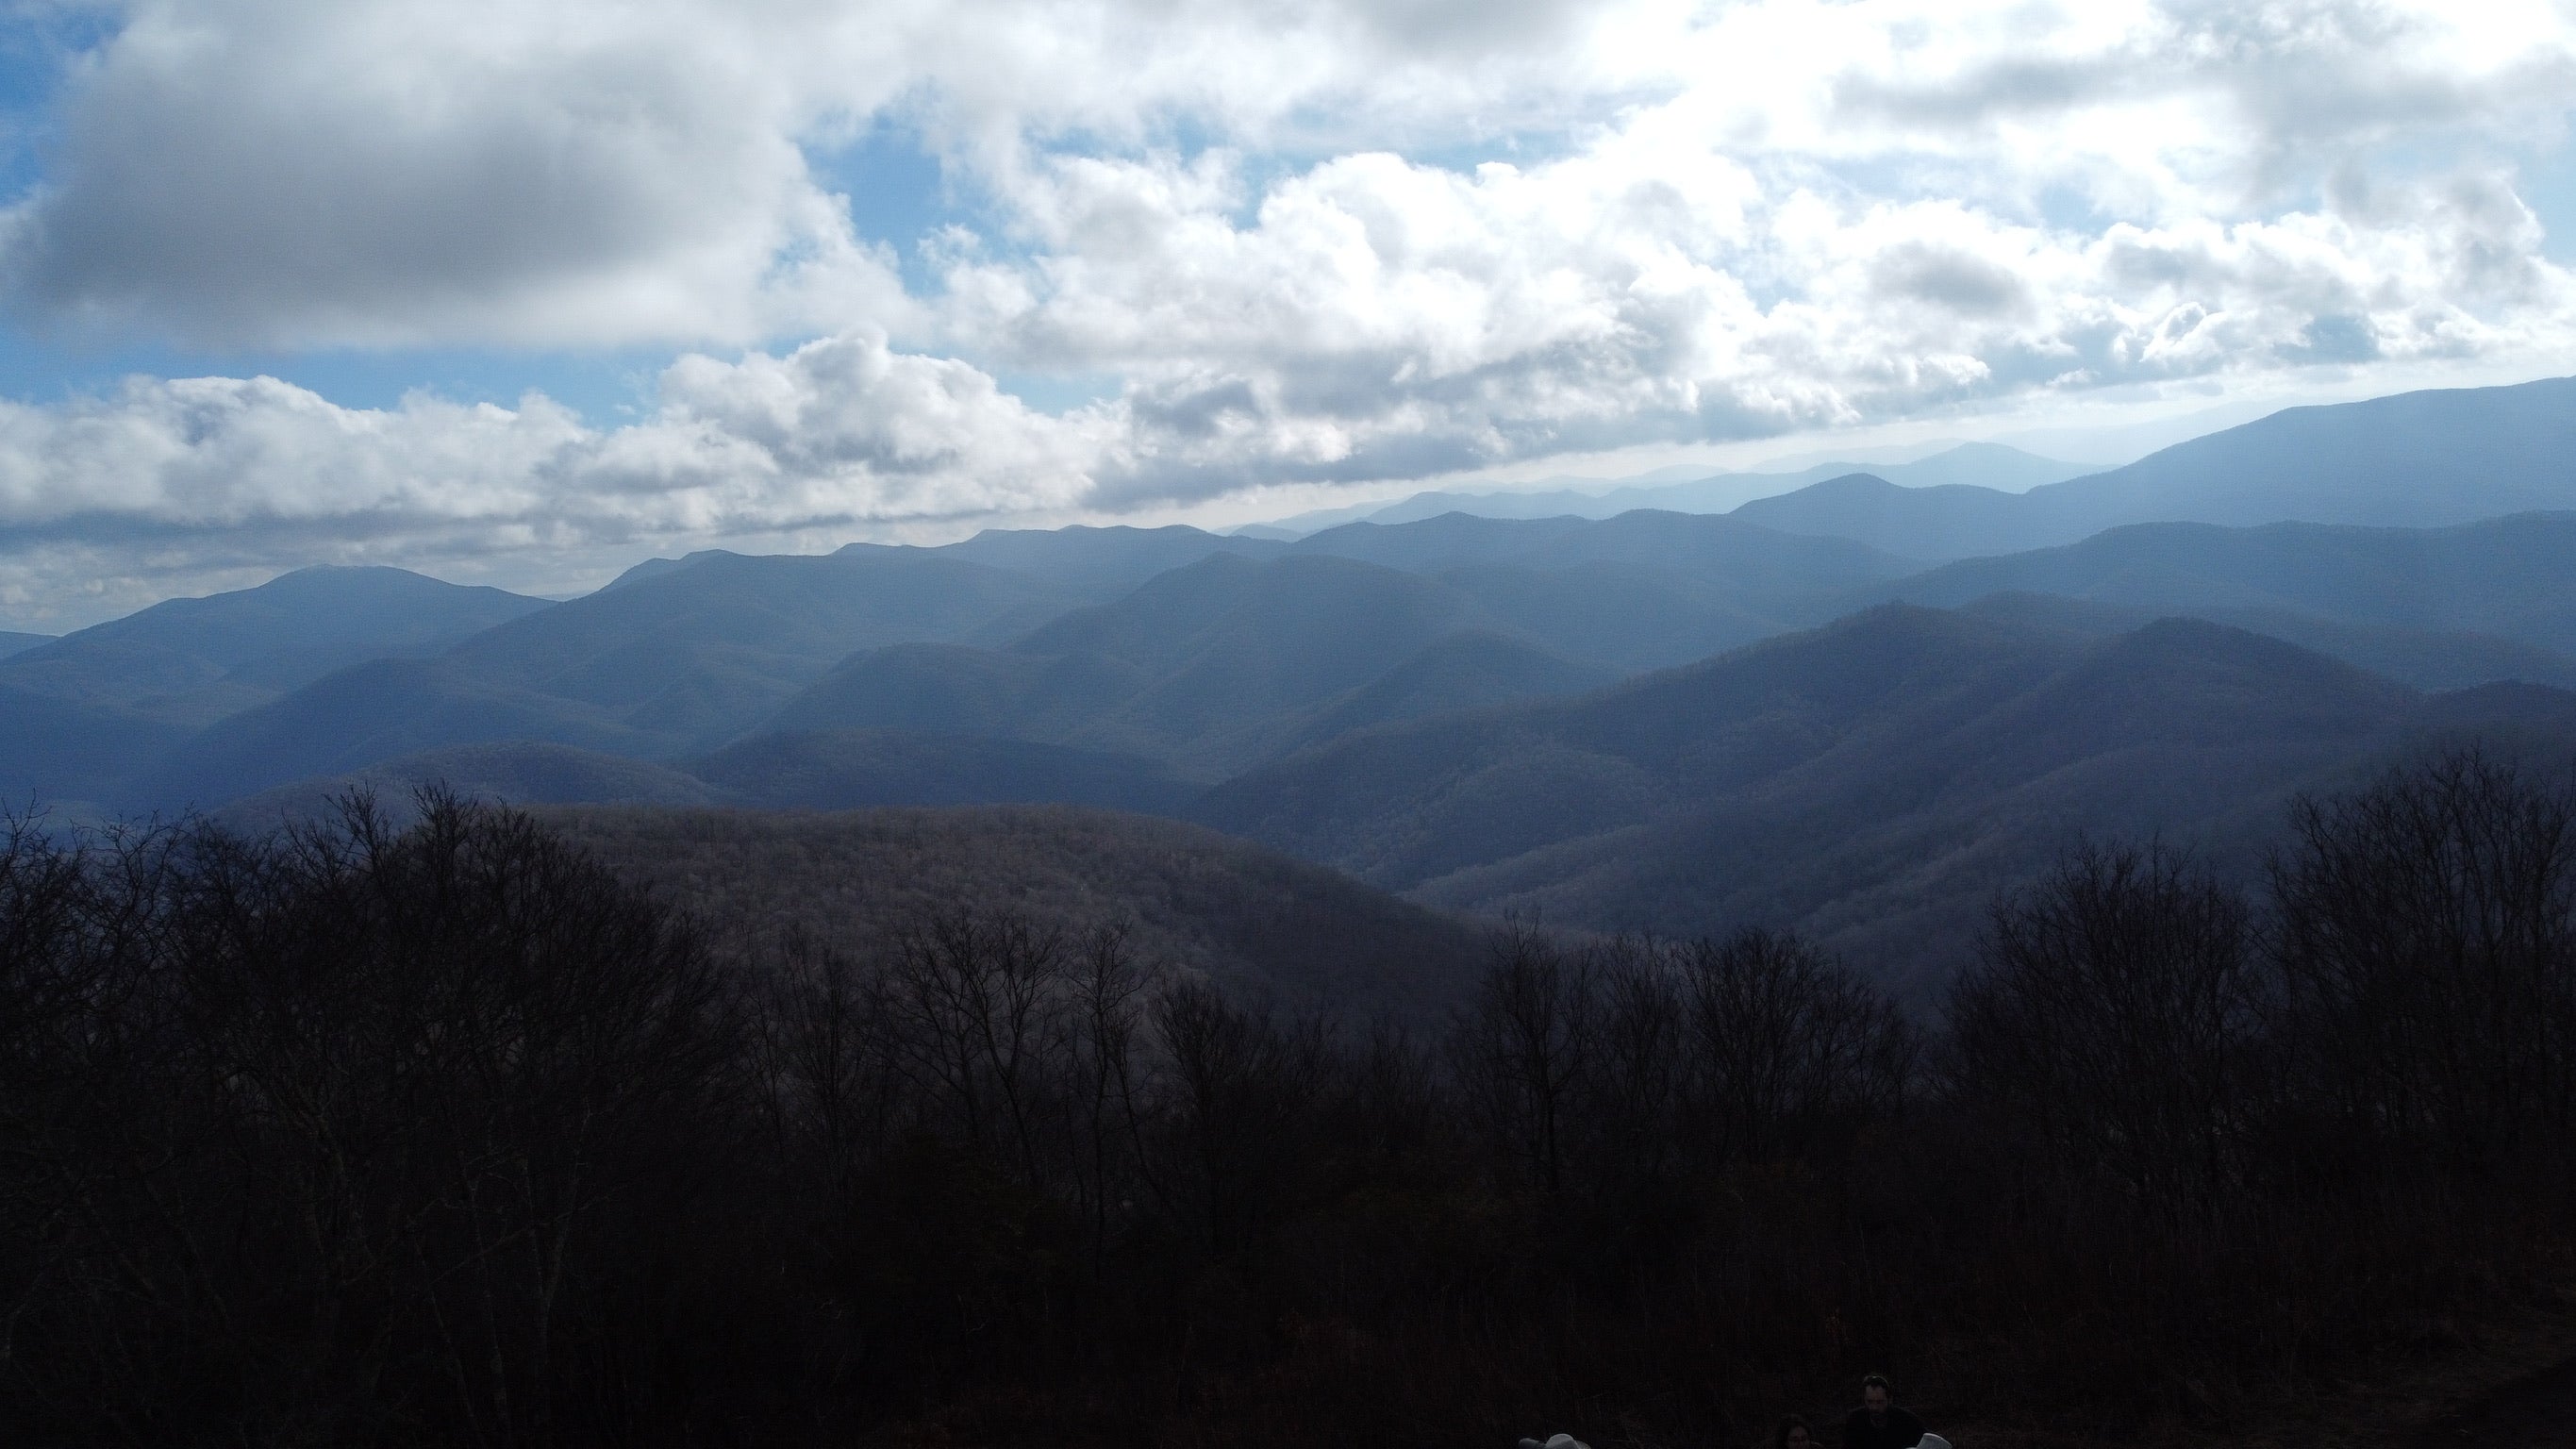 Camper submitted image from Siler Bald - 1